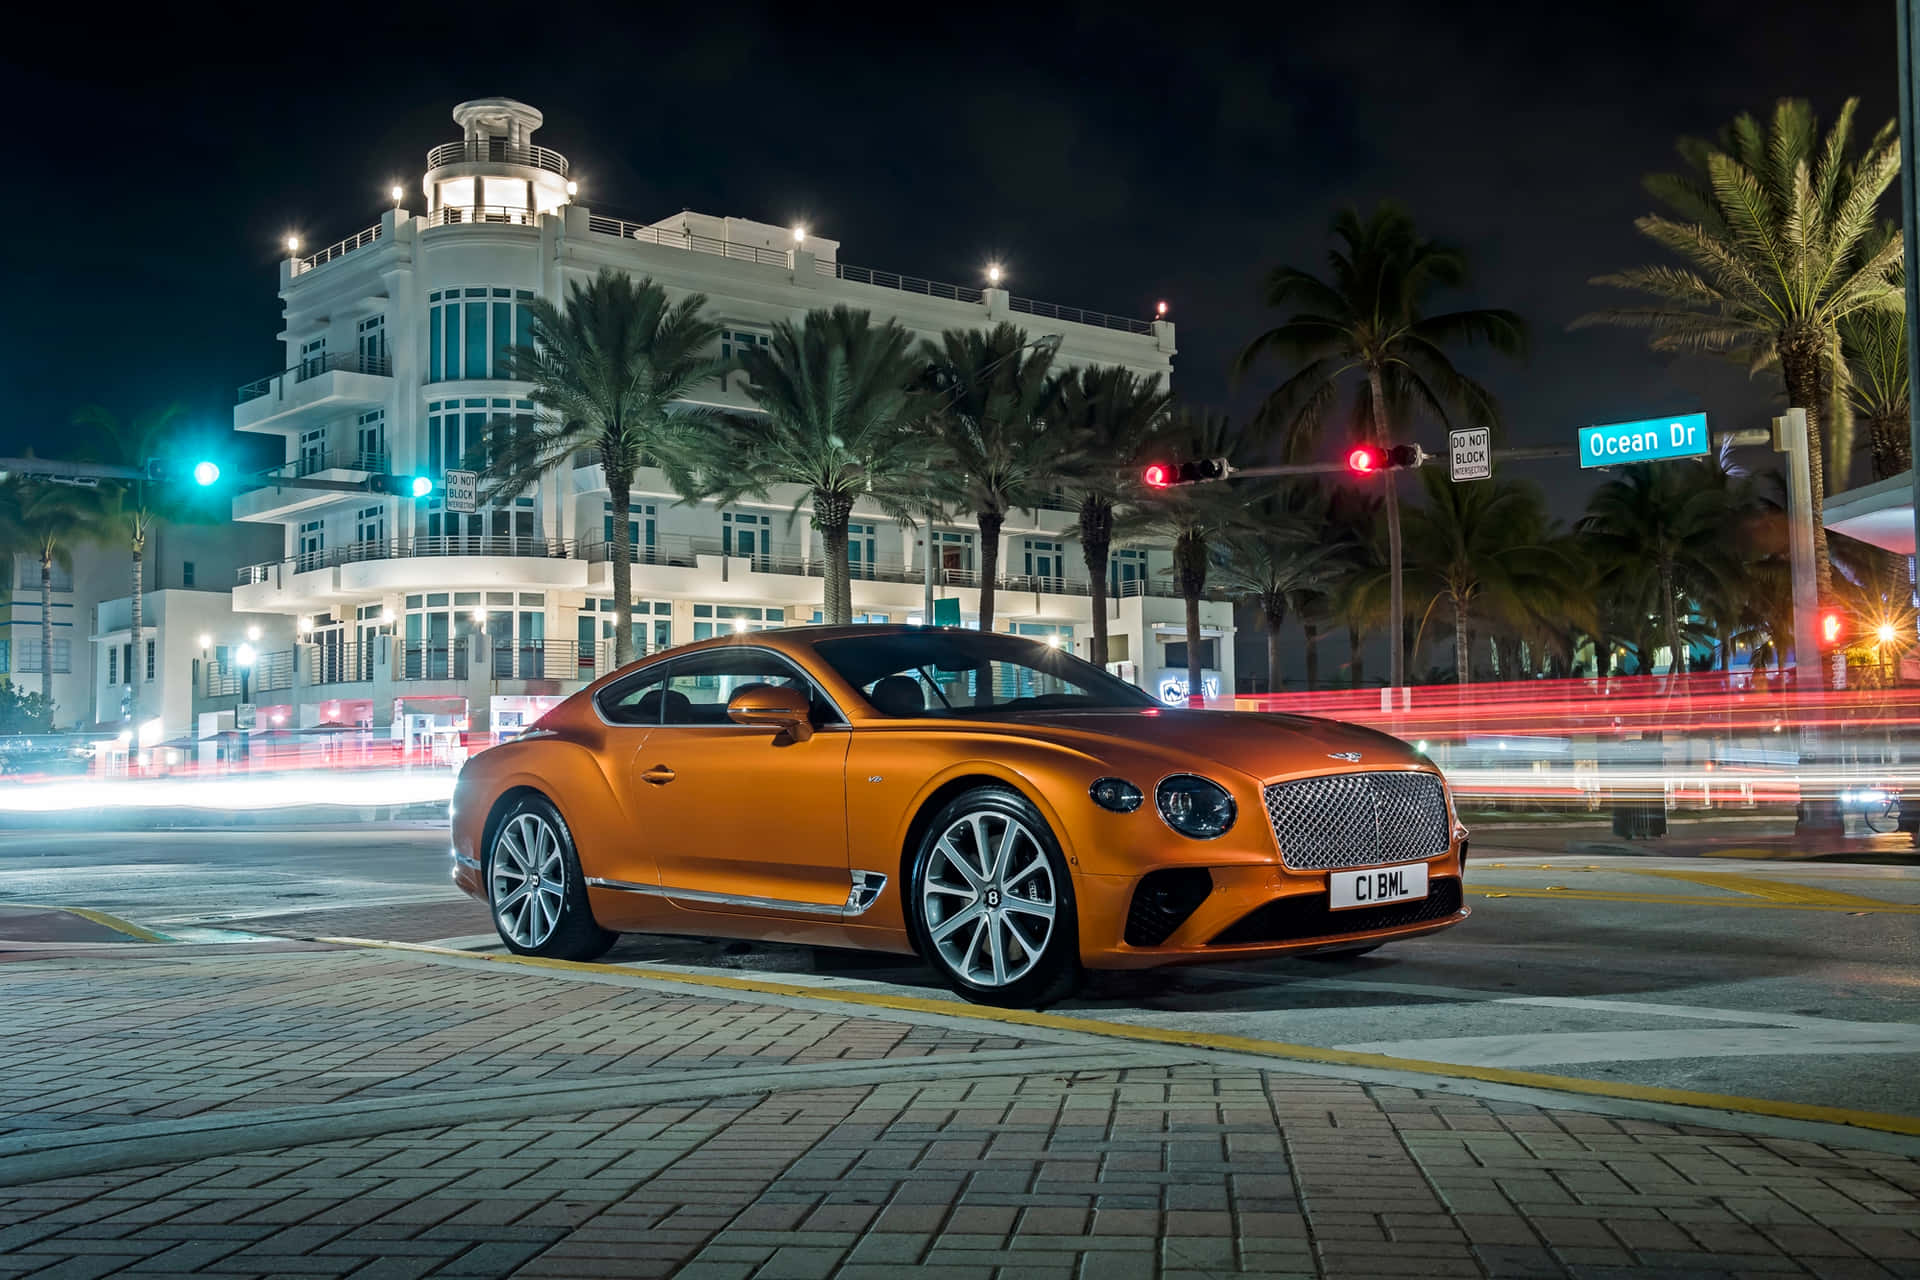 Experience Luxury Sports With the Bentley Sport Wallpaper